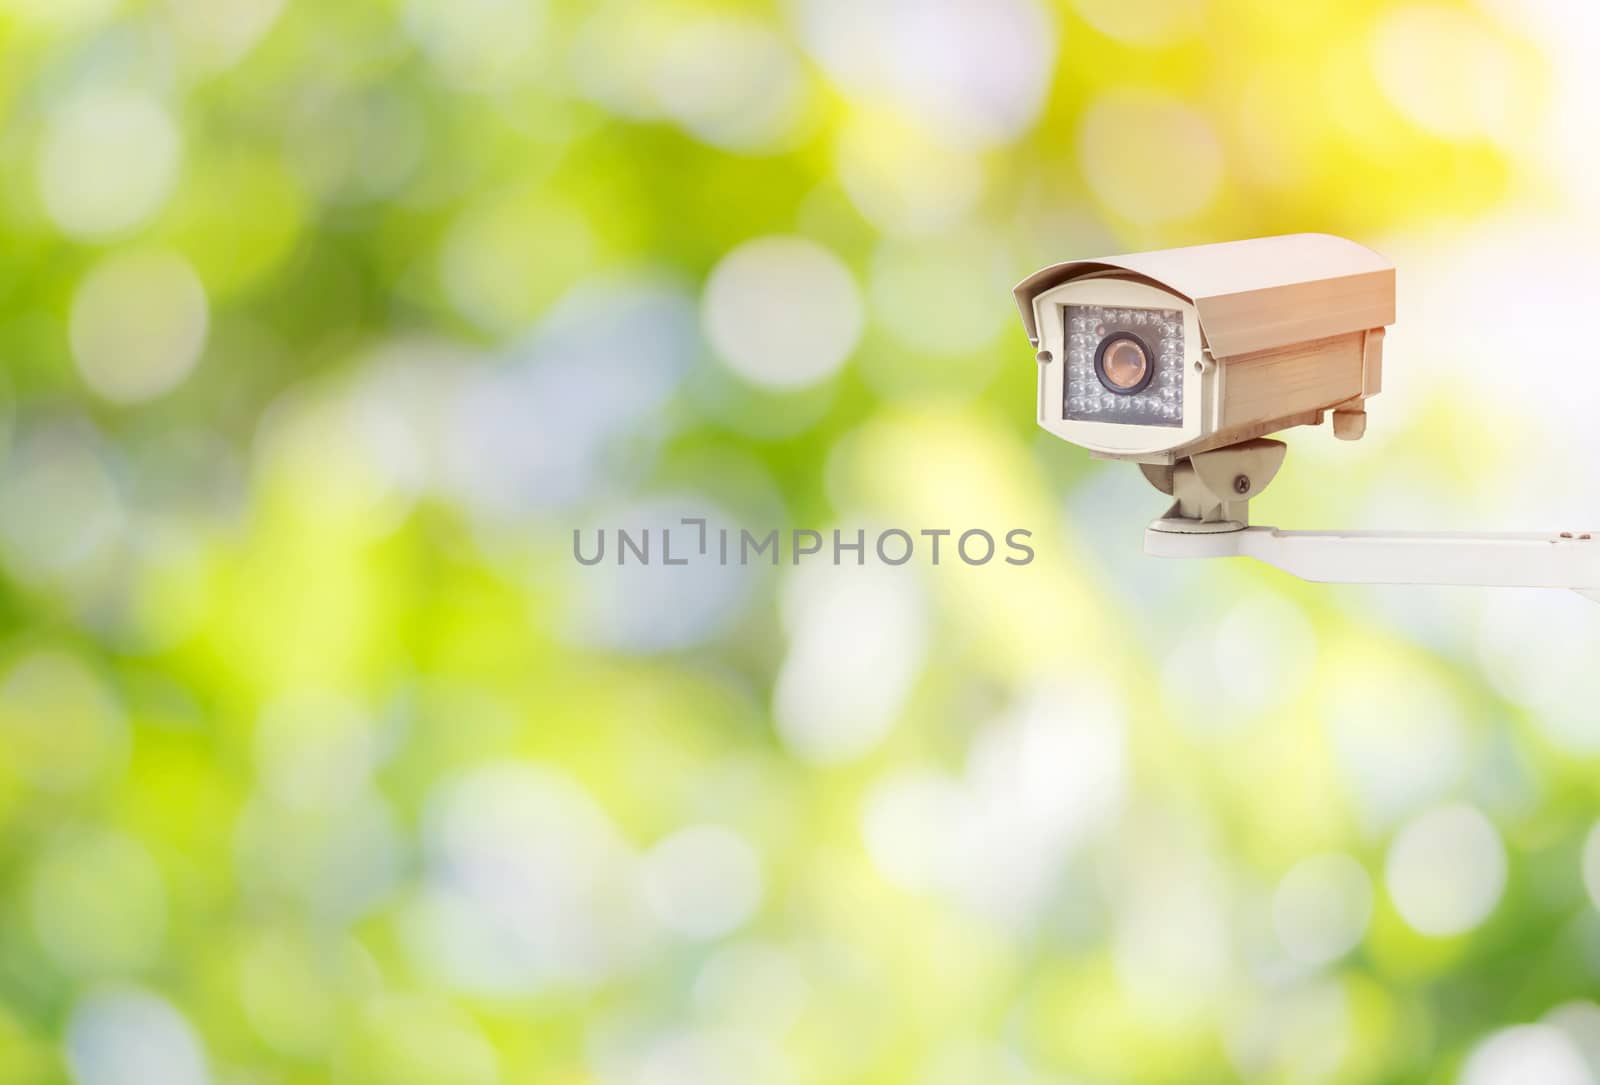 Closeup CCTV or surveillance camera in the garden with colorful green nature background.